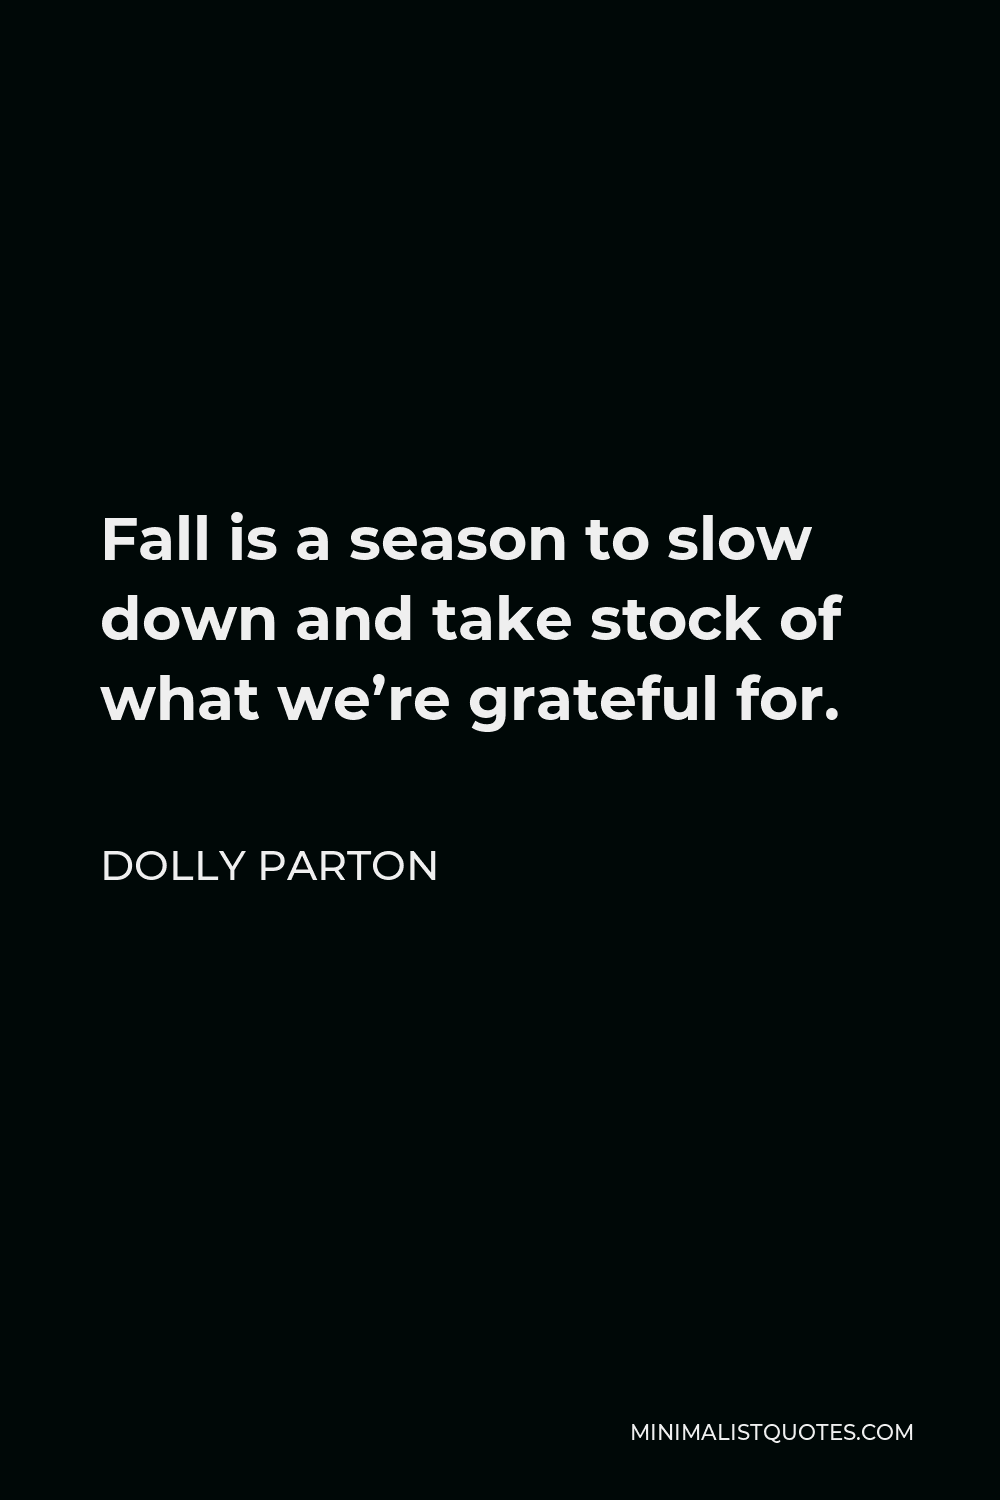 Dolly Parton Quote - Fall is a season to slow down and take stock of what we’re grateful for.